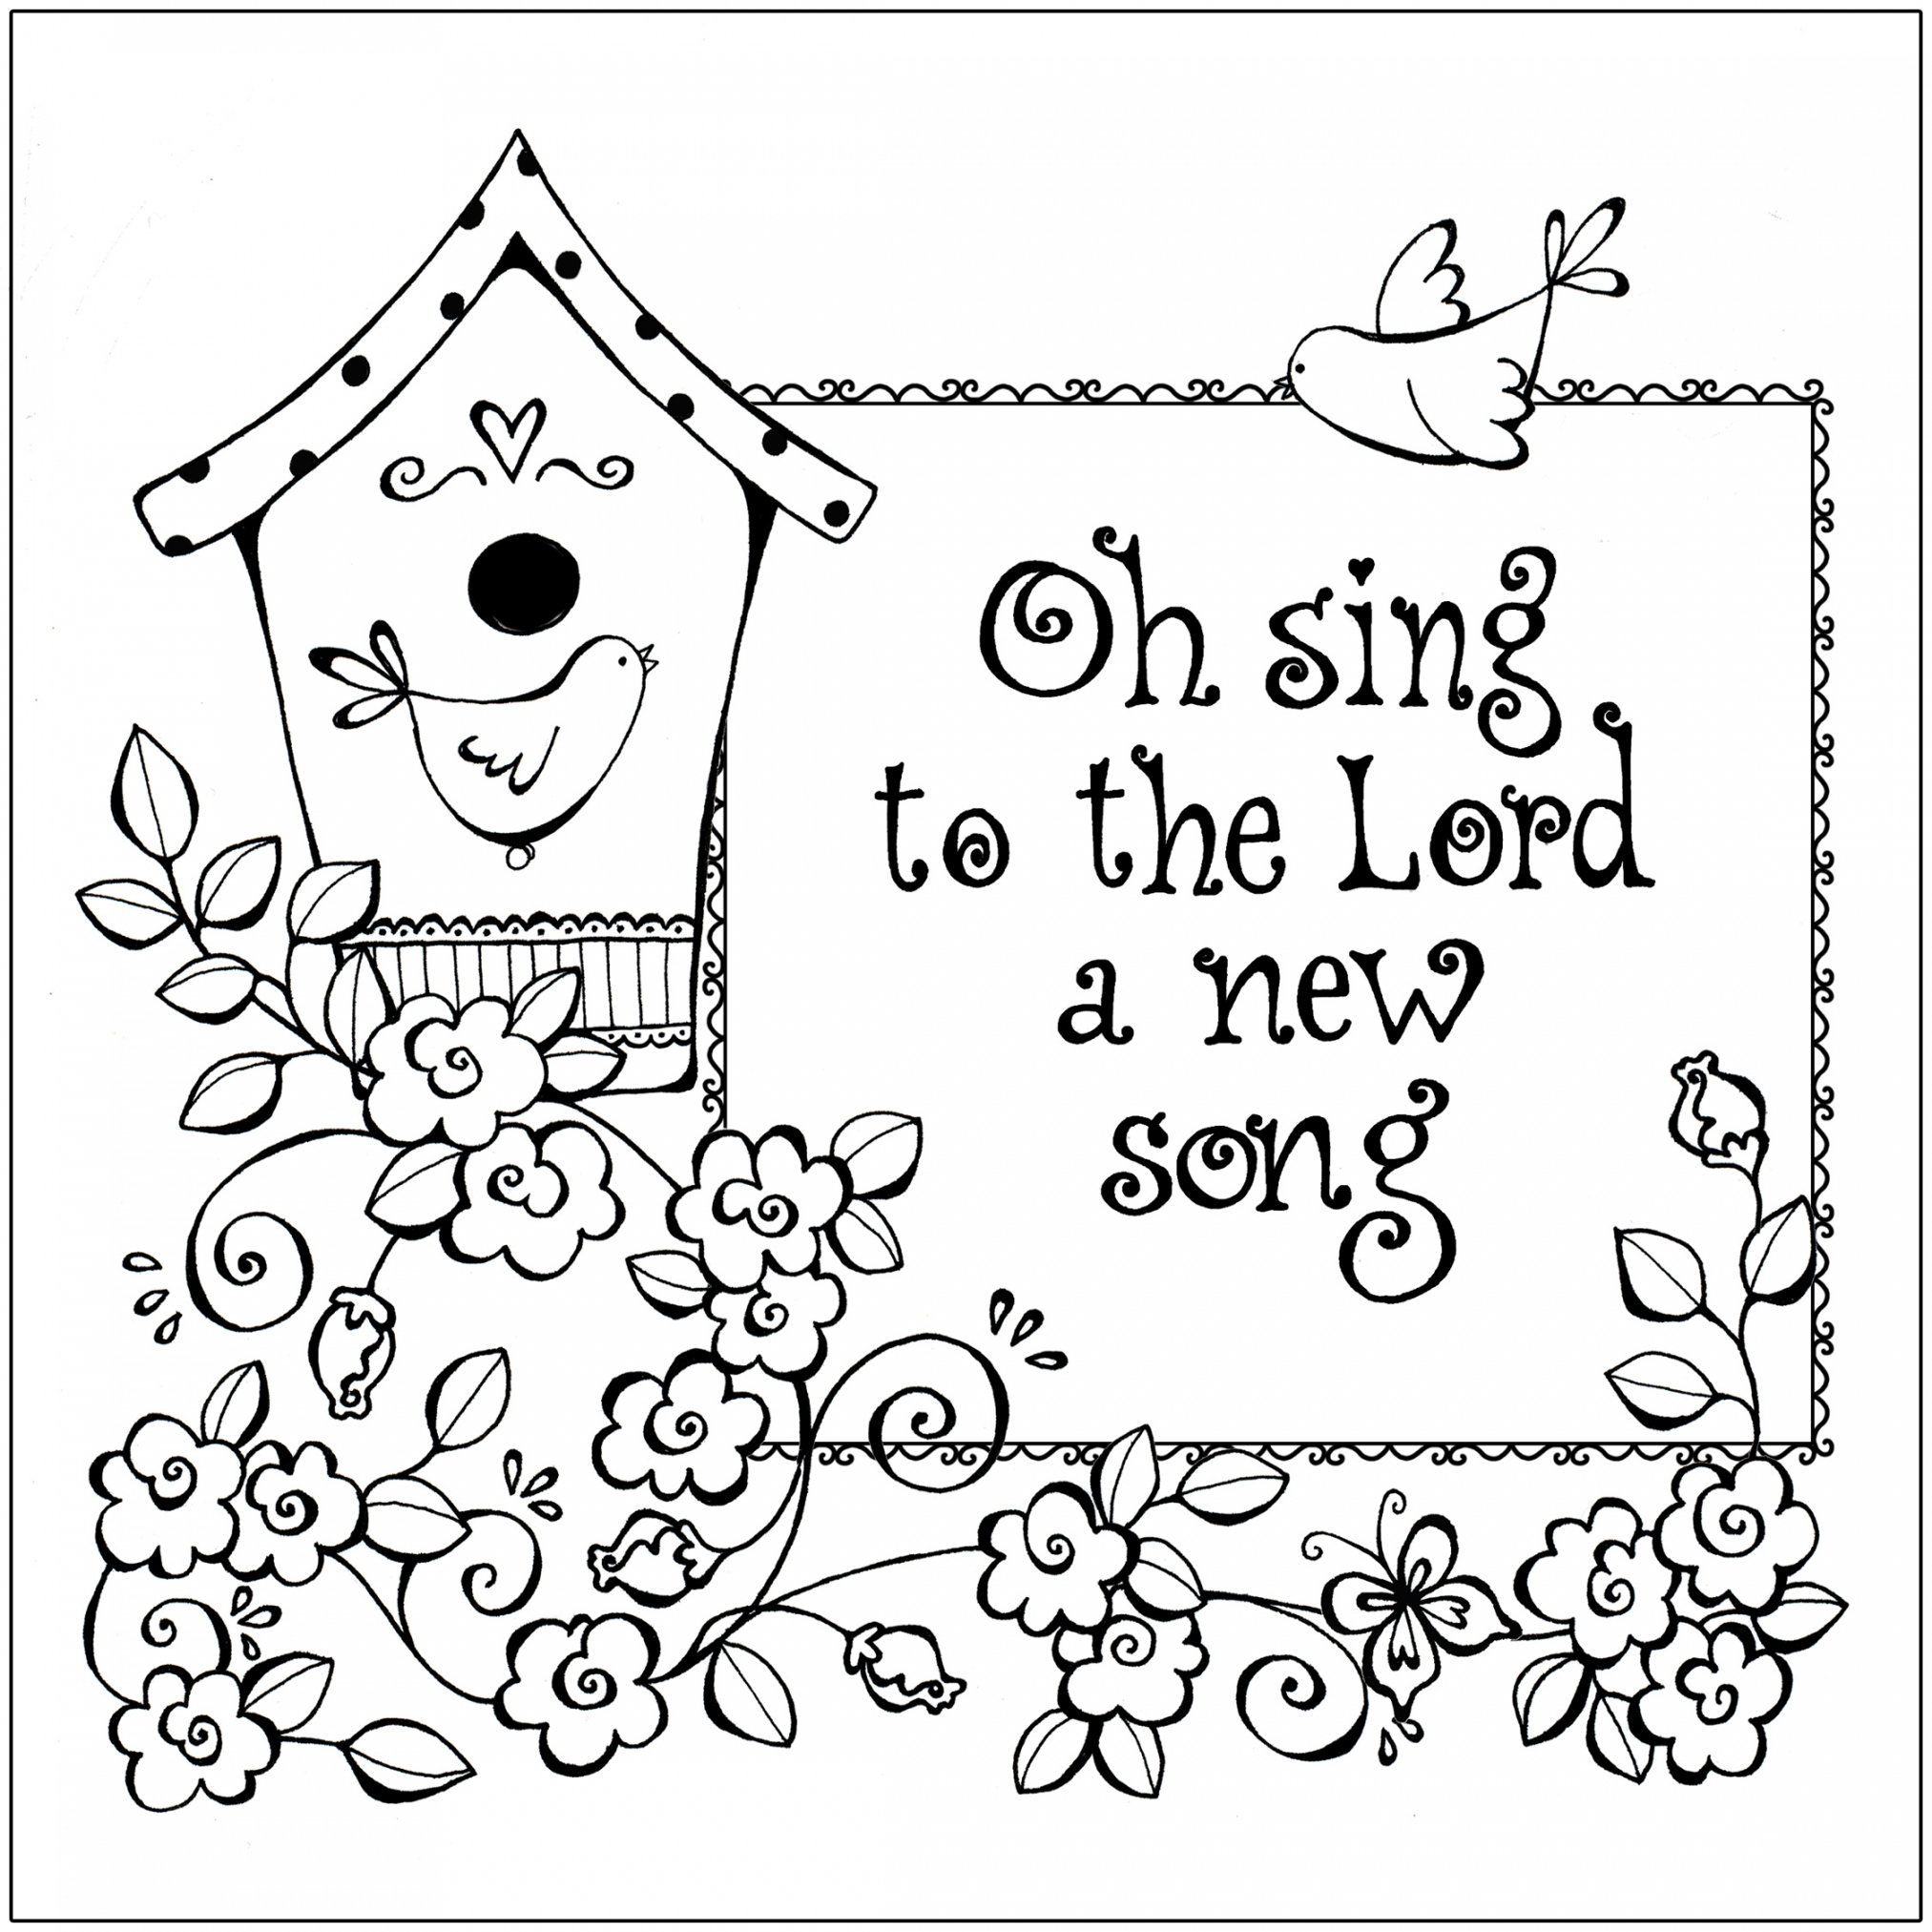 Free Printable Christian Coloring Pages - Printable - Free Printable Christian Coloring Pages for Kids - Best Coloring